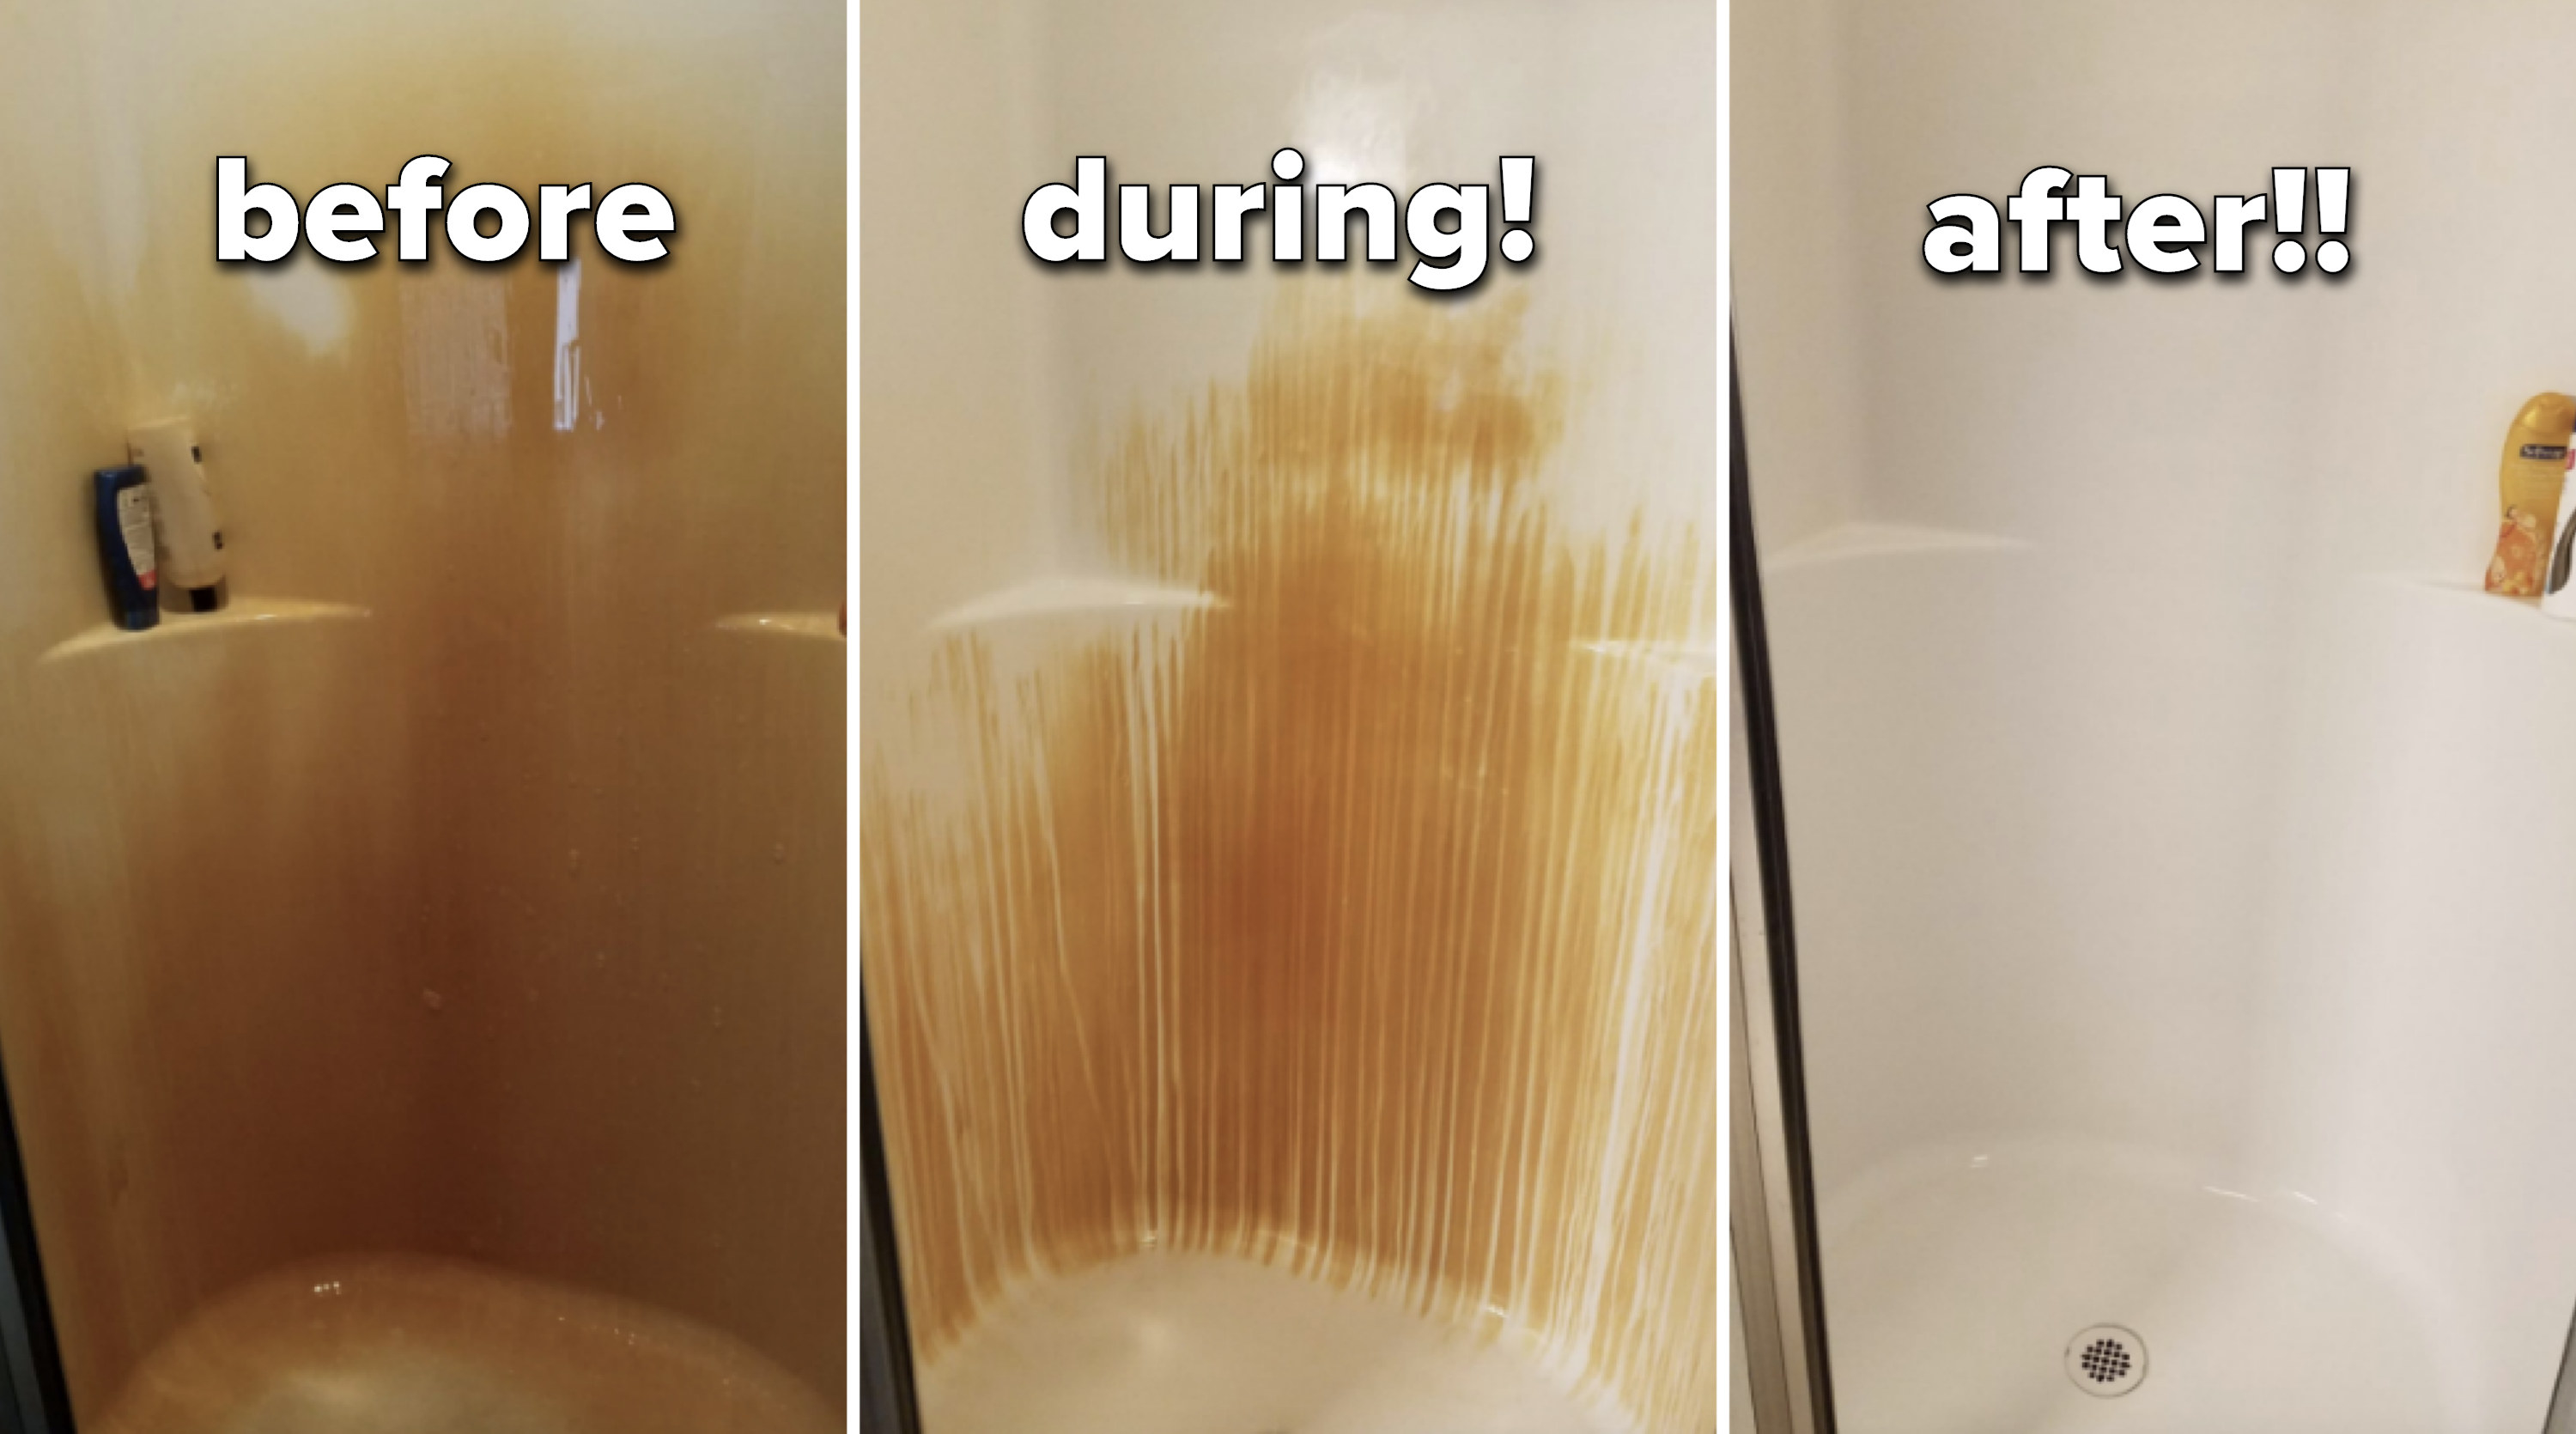 Reviewer&#x27;s progress pic of using the spray gel on their shower. The &quot;during&quot; pic shows rust dripping off the shower walls, and the after shows a rust stain-free shower.